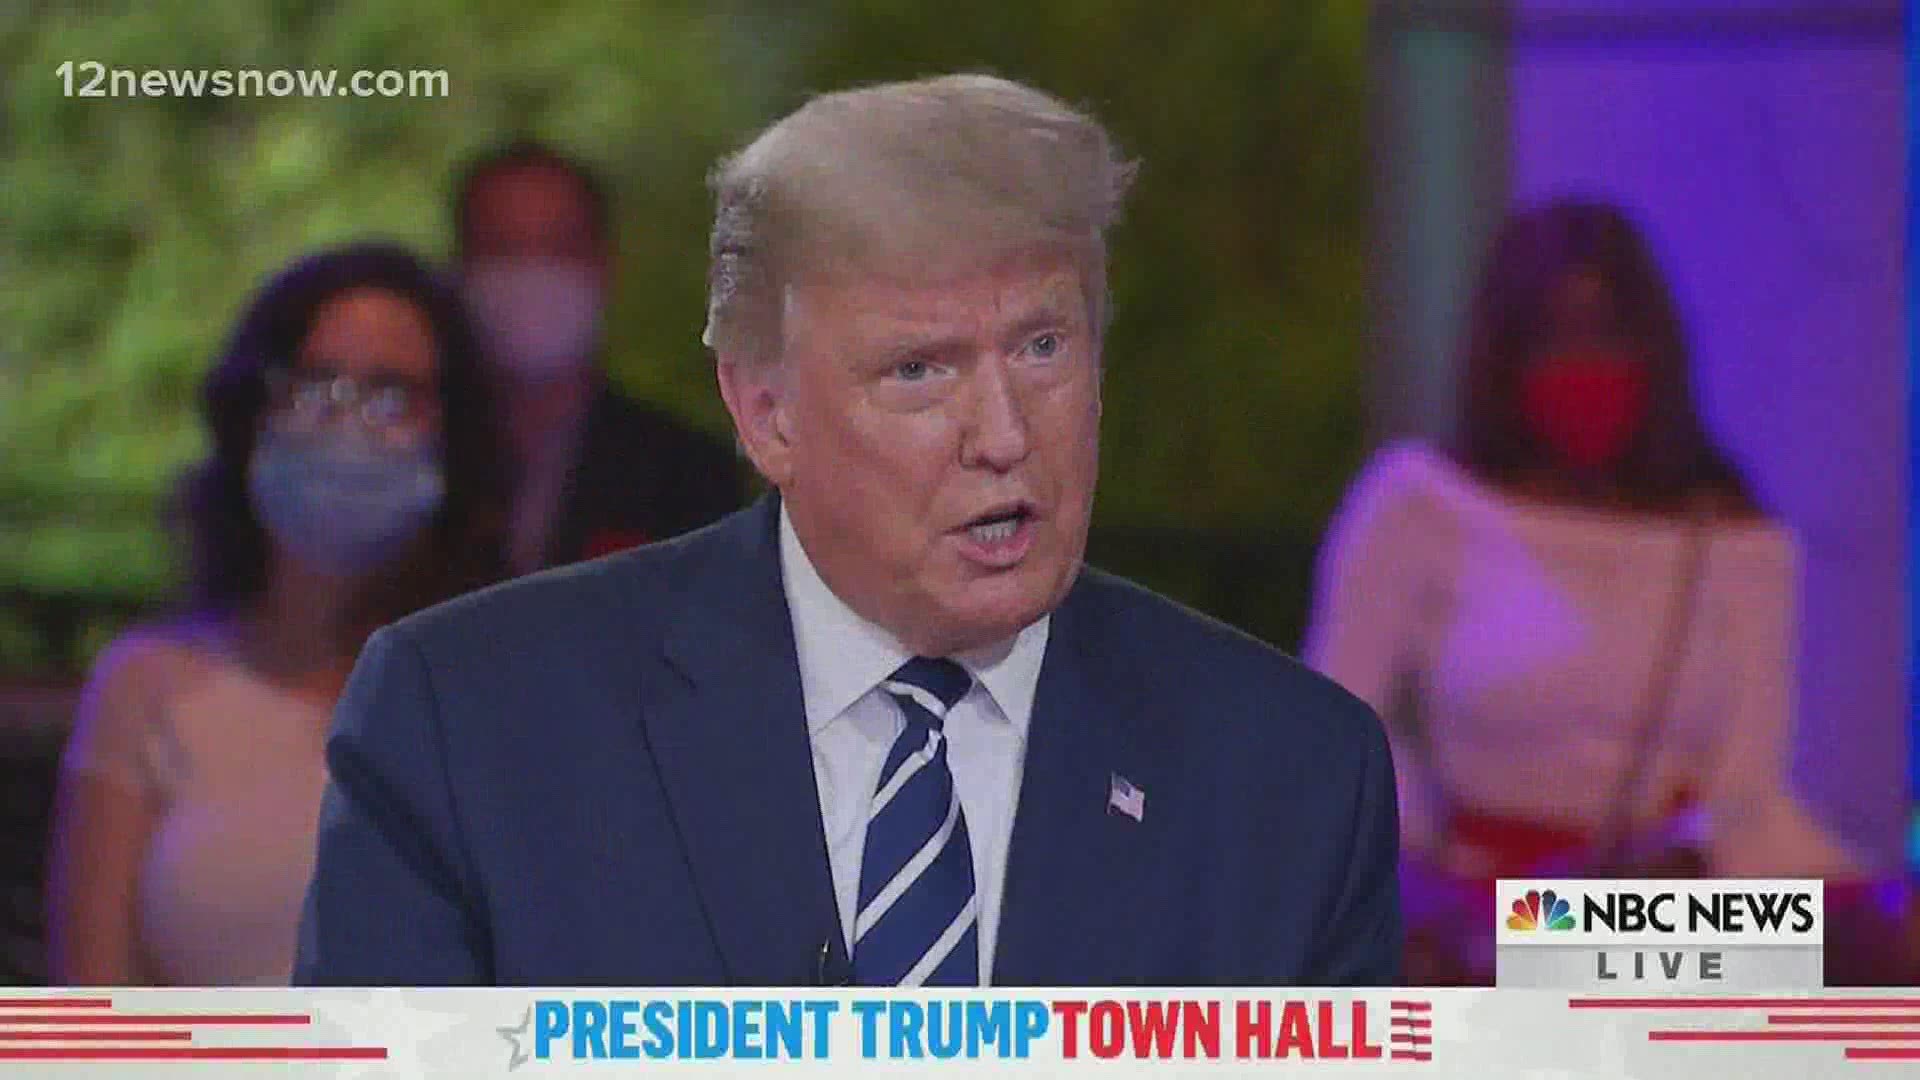 President Trump was asked whether he took a COVID-19 test the 1st day of the Democratic debate during an NBC town hall while Joe Biden talked at an ABC town hall.